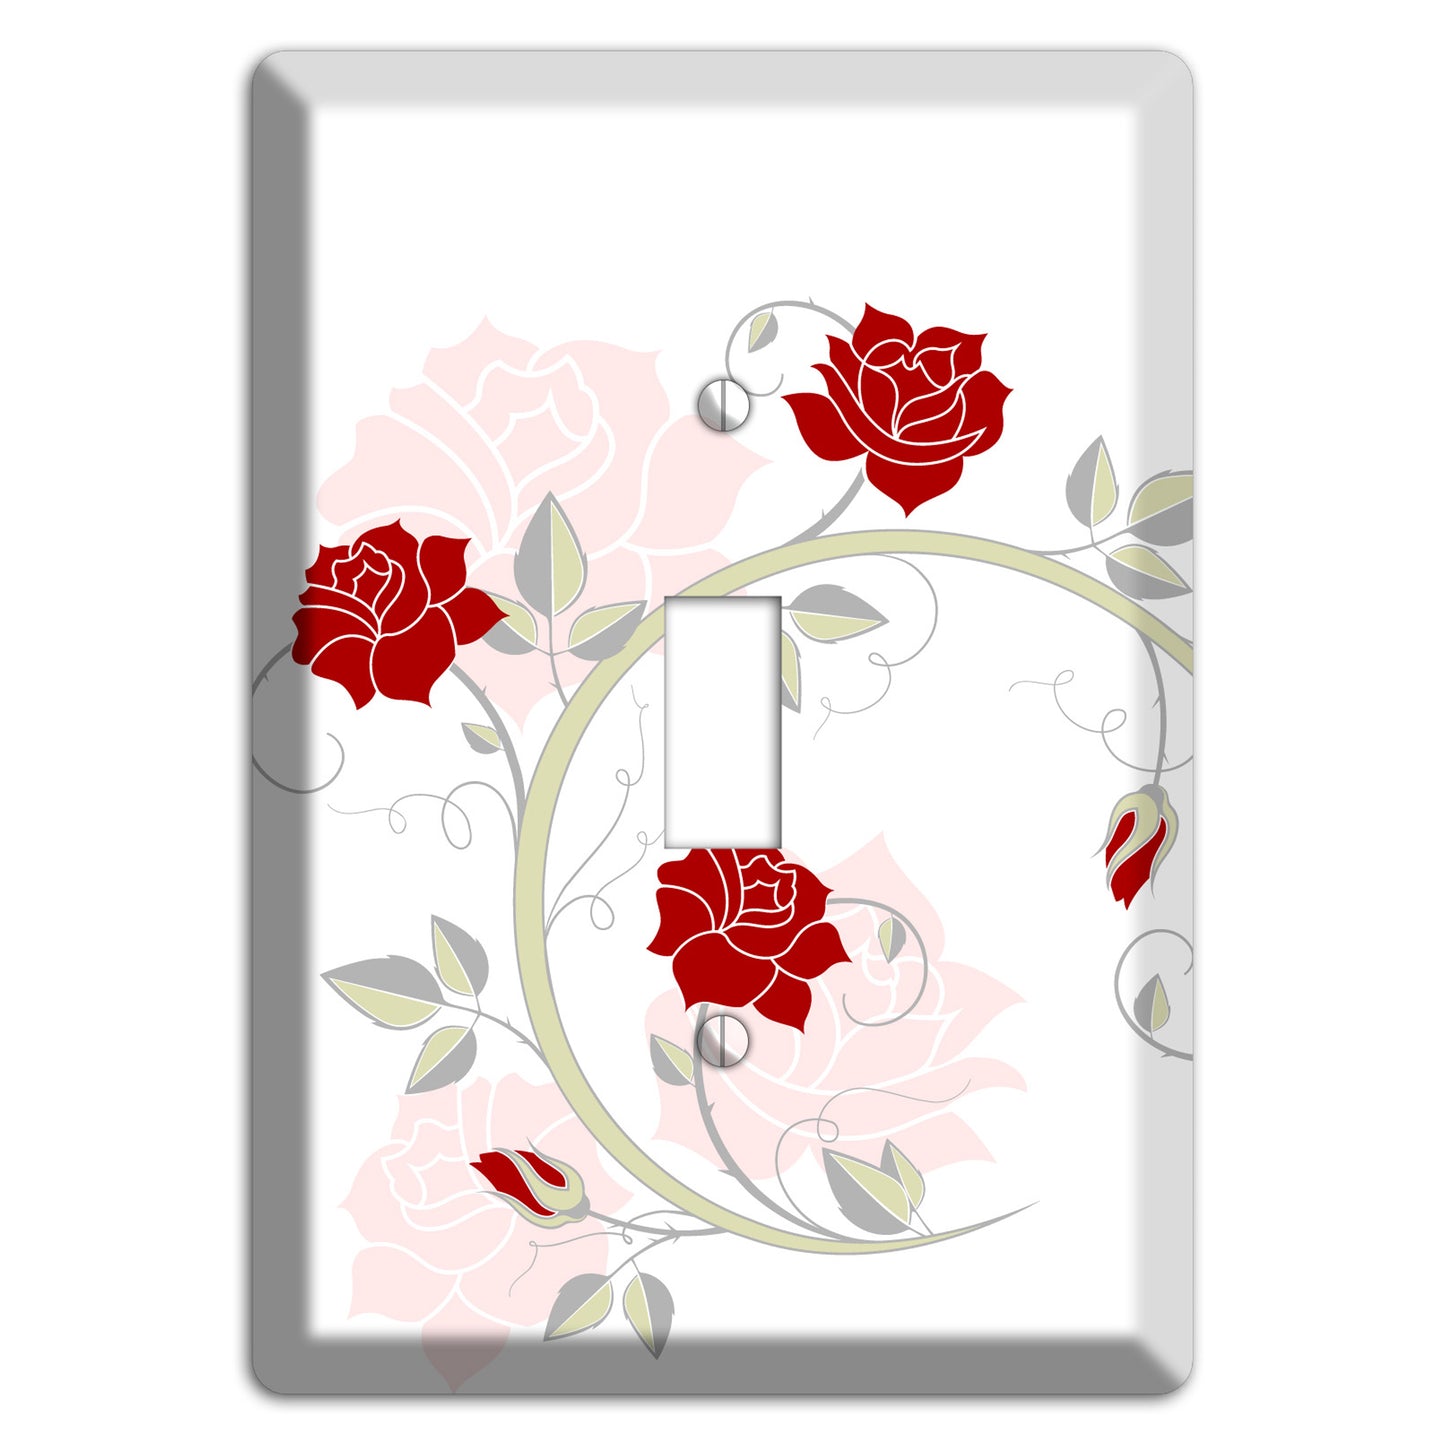 Red Rose Cover Plates